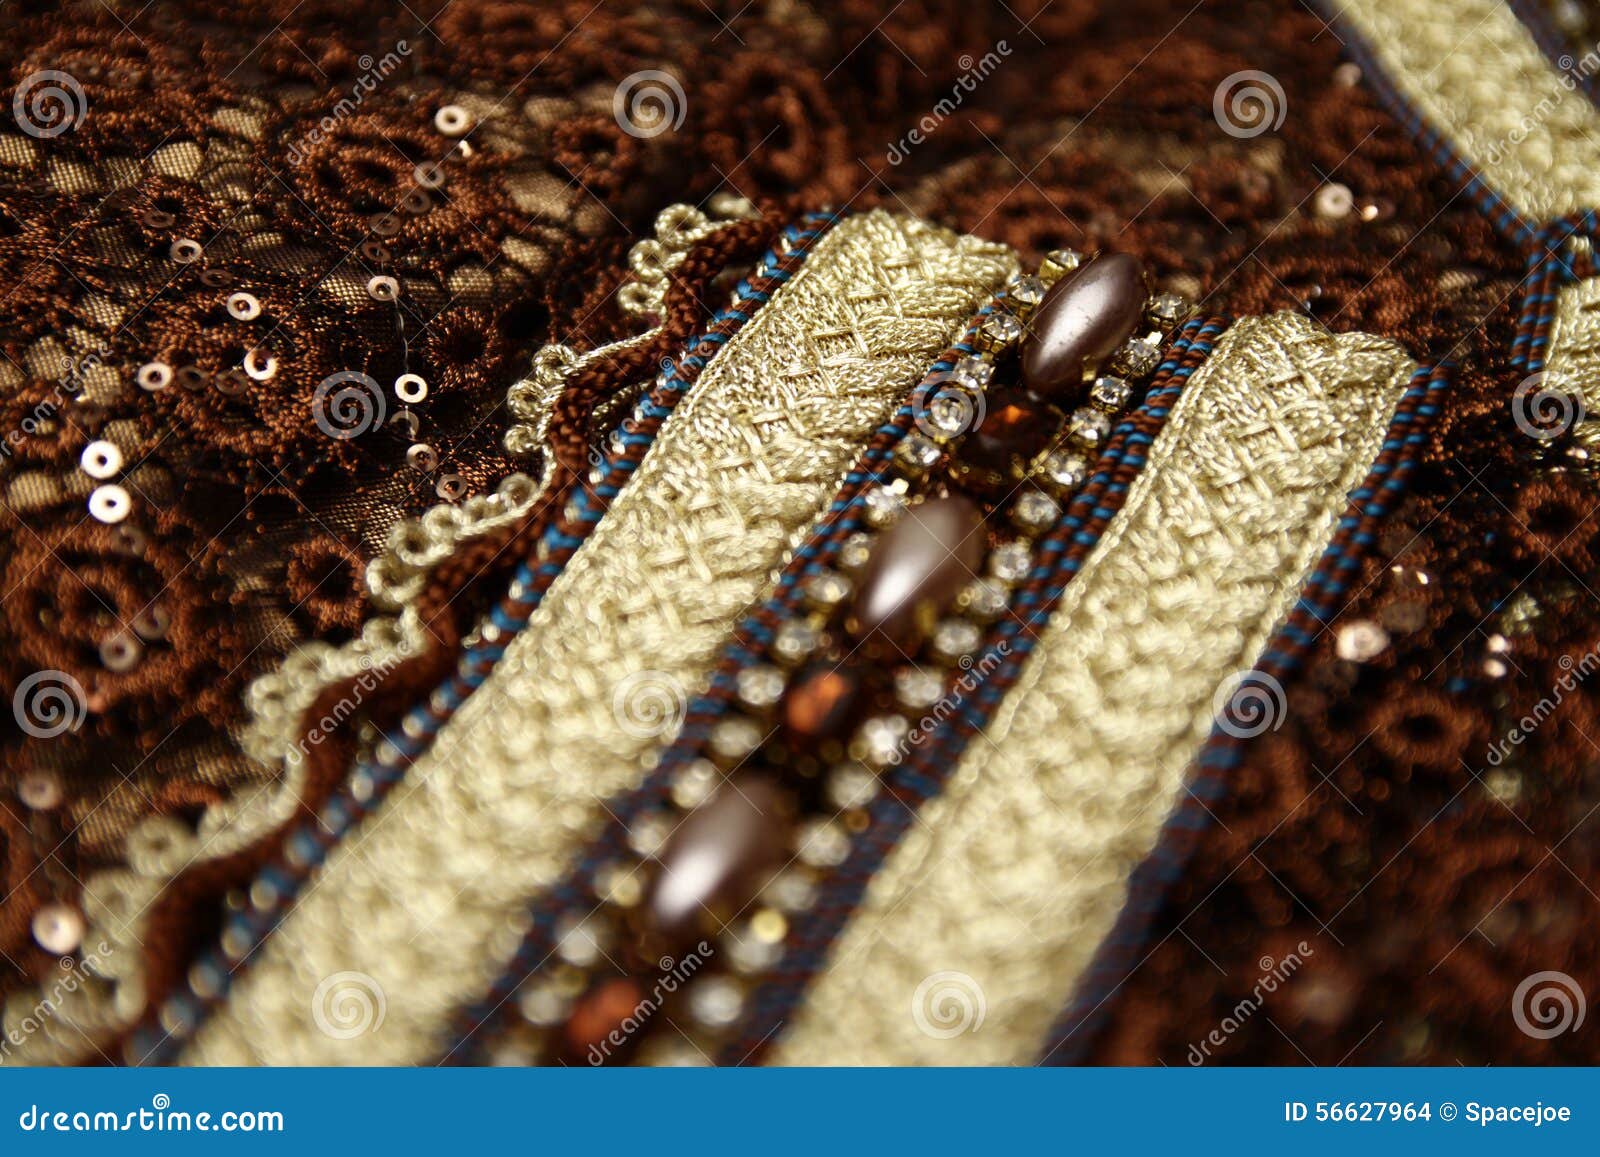 brown moroccan caftan embroidery details